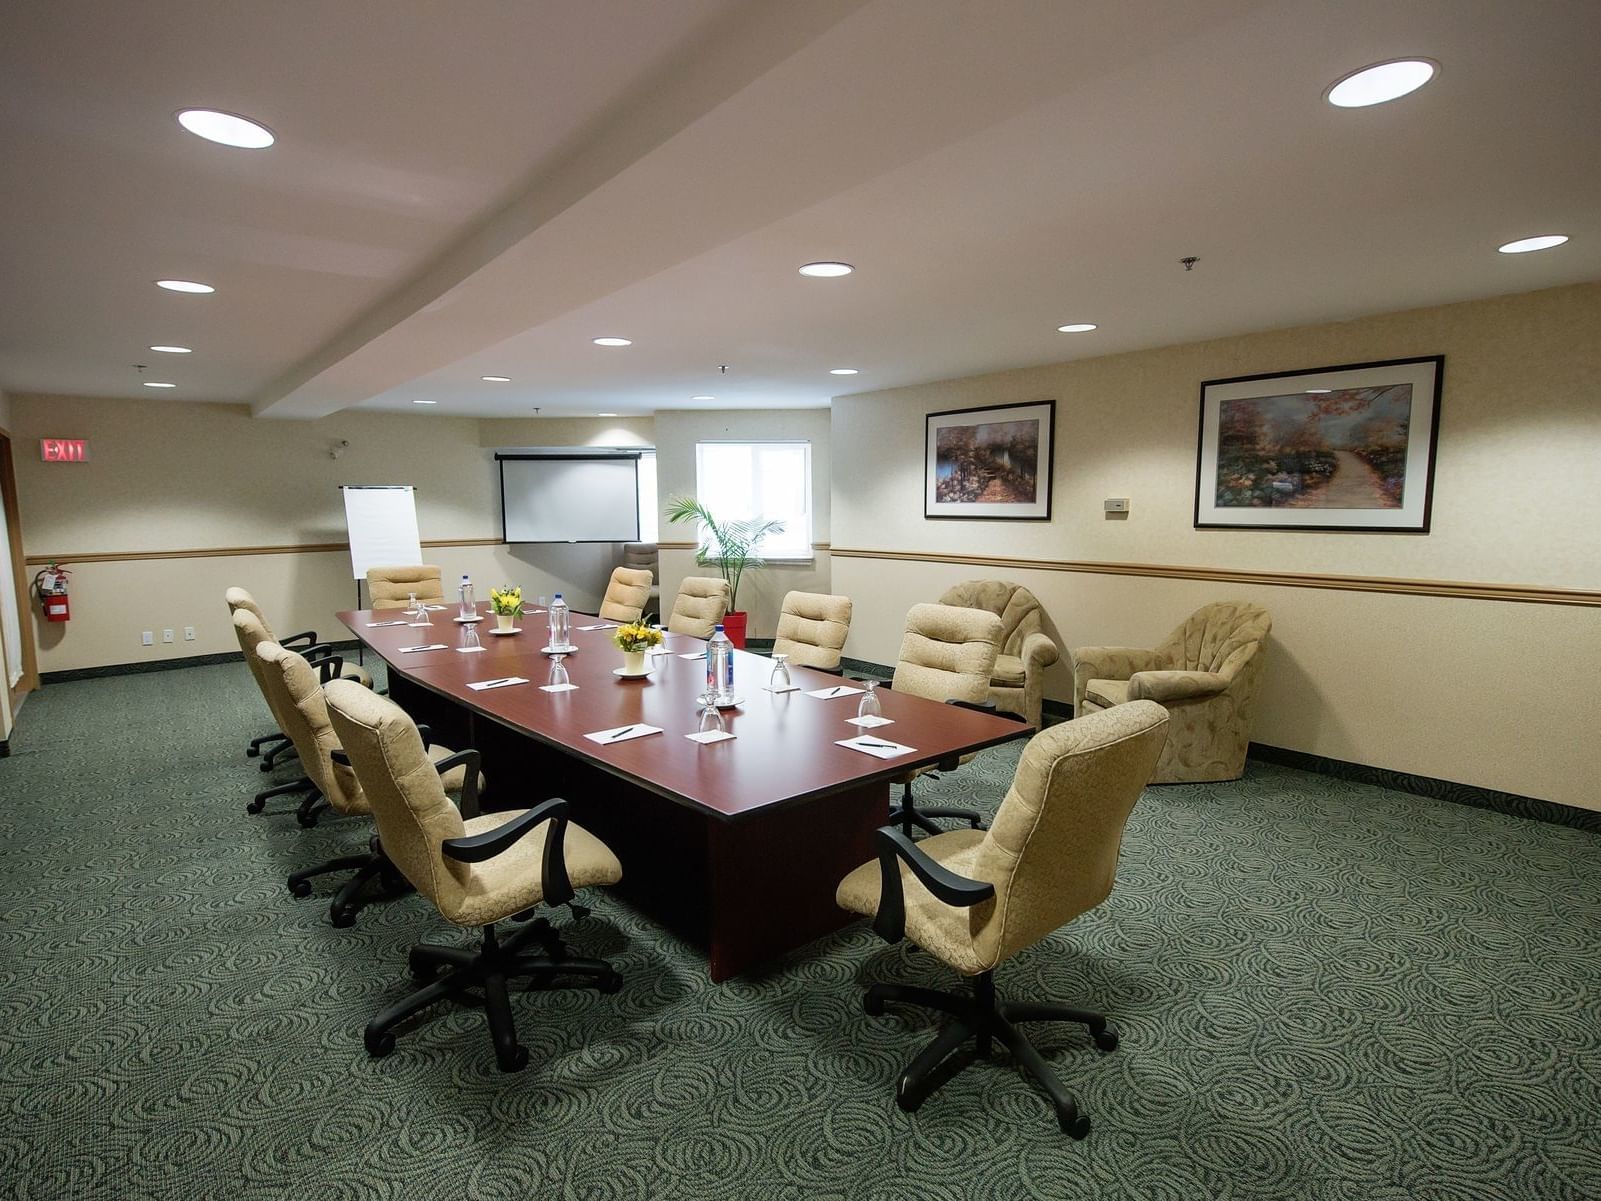 conference room with long table